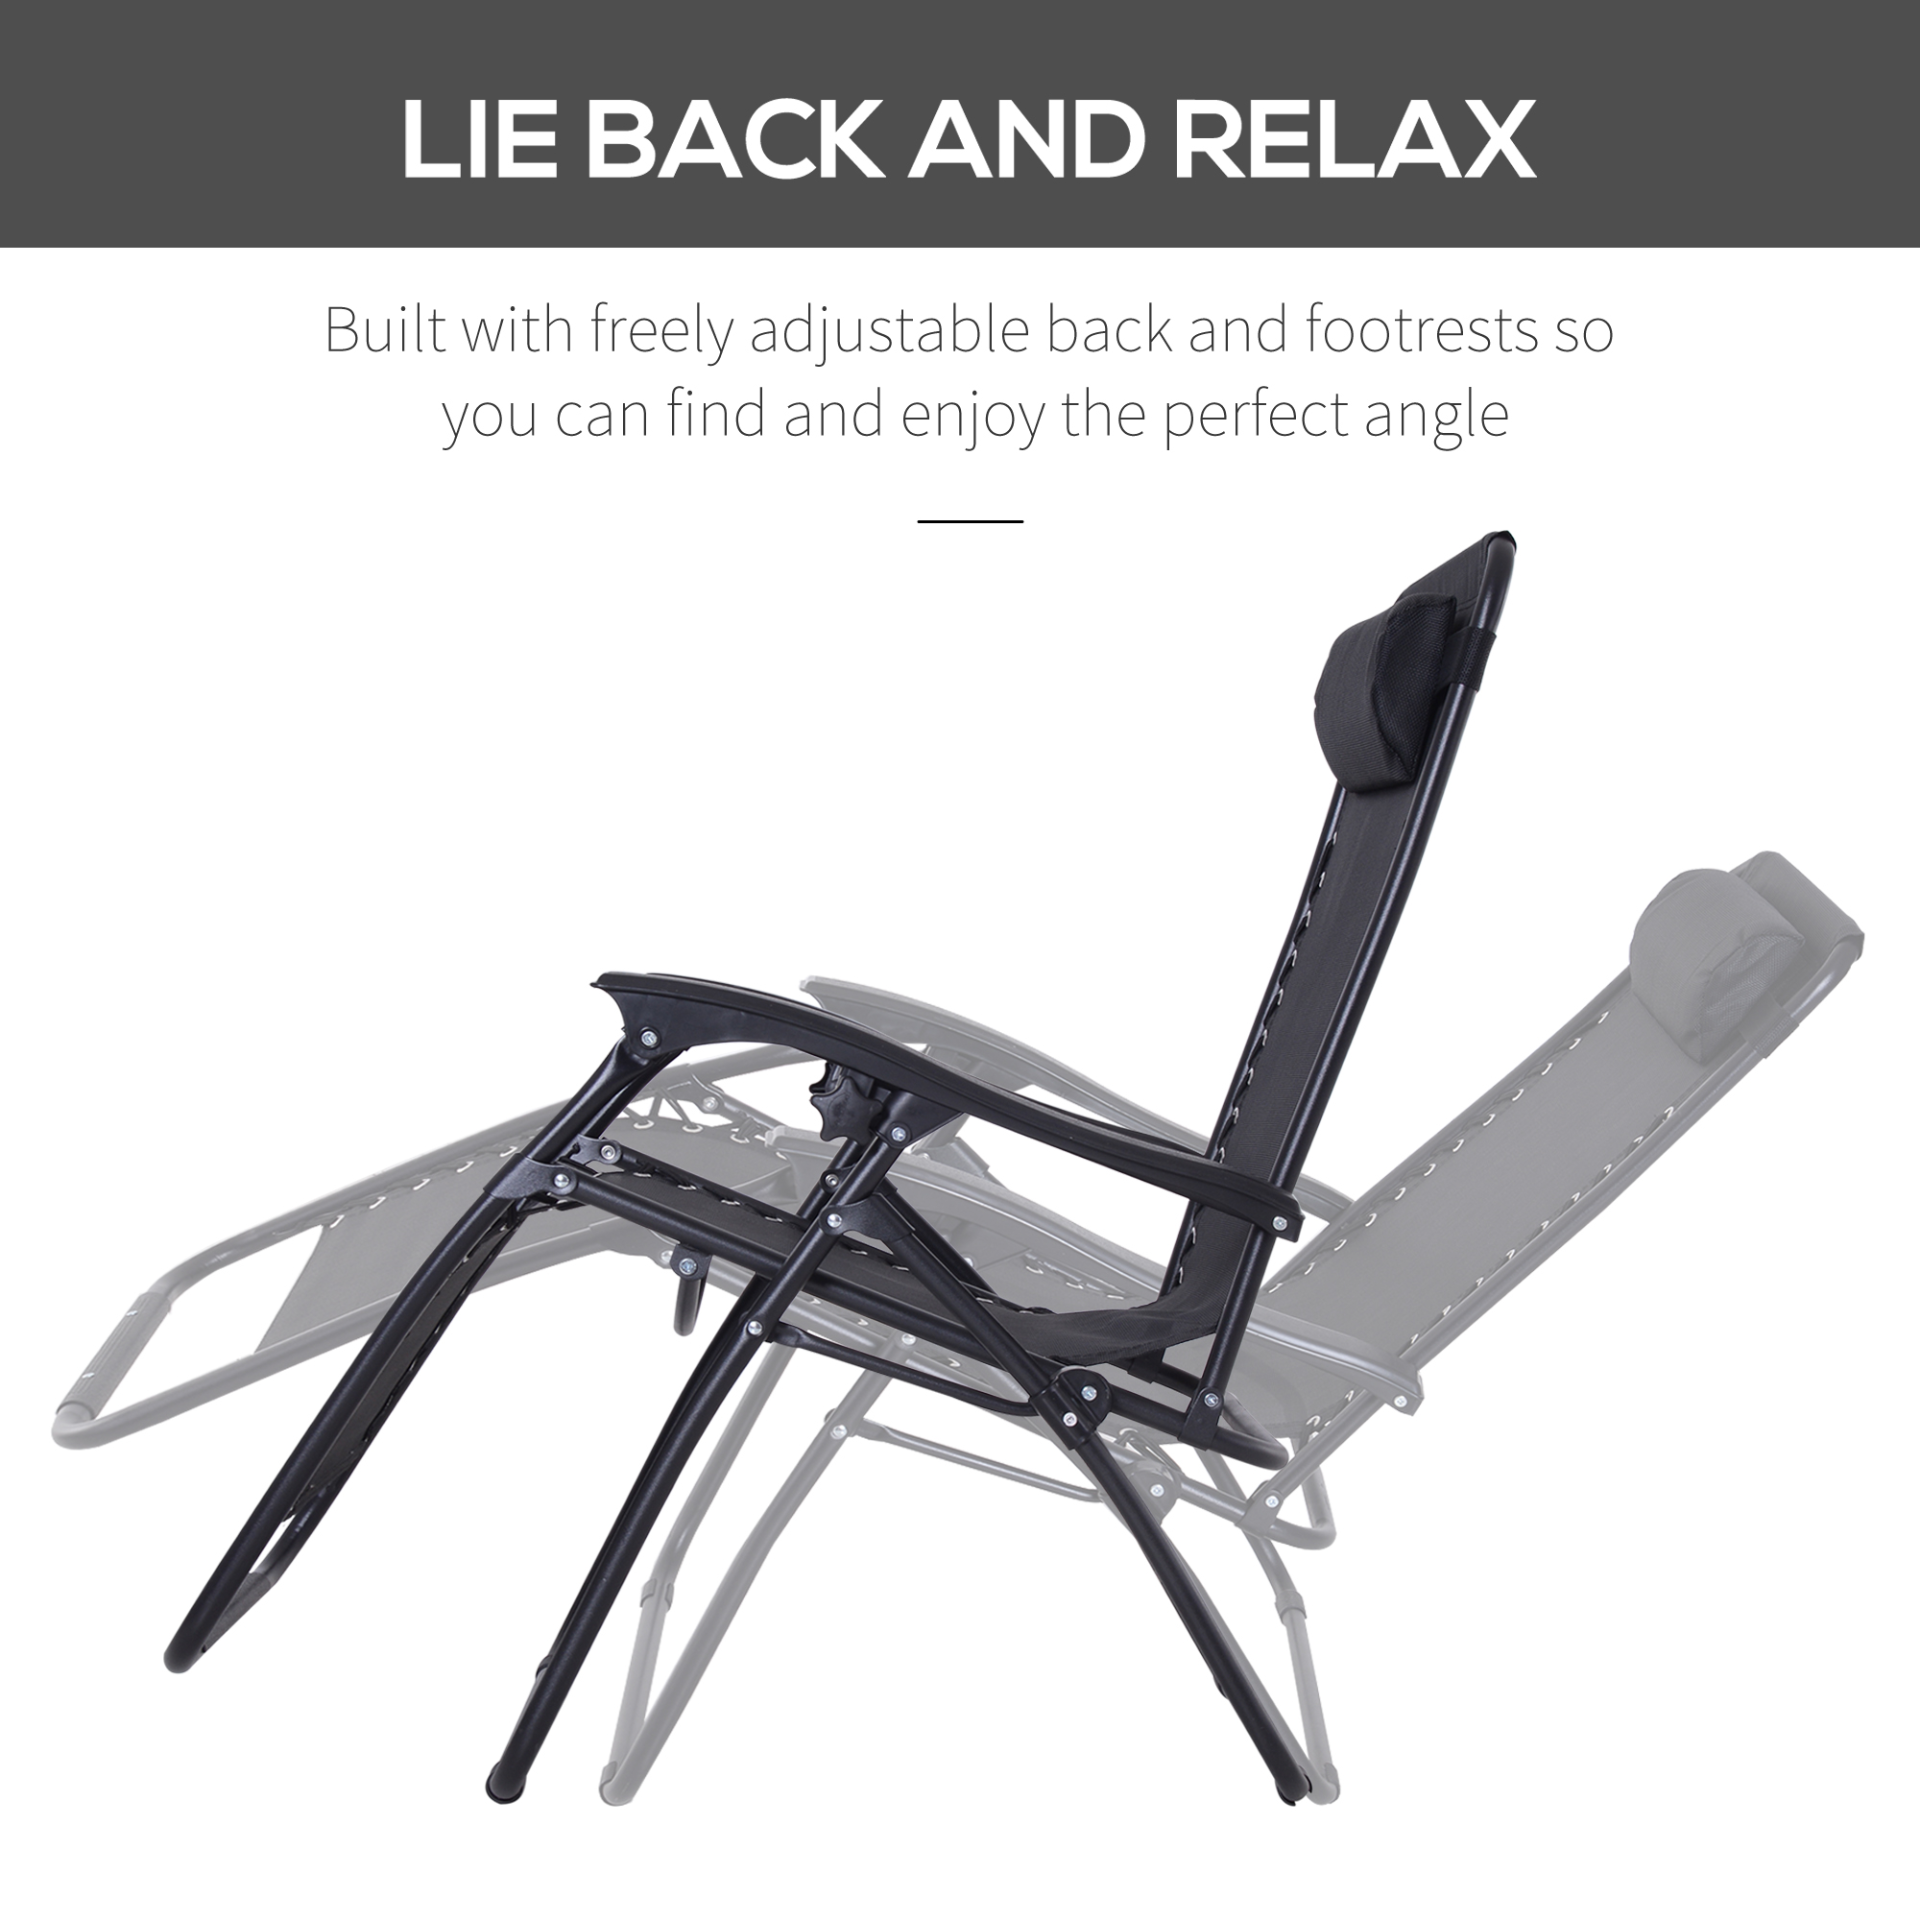 Outsunny Zero Gravity Chair - Metal Frame Texteline Armchair for Outdoor Relaxation - Black Camping Chair Cosy Camping Co.   